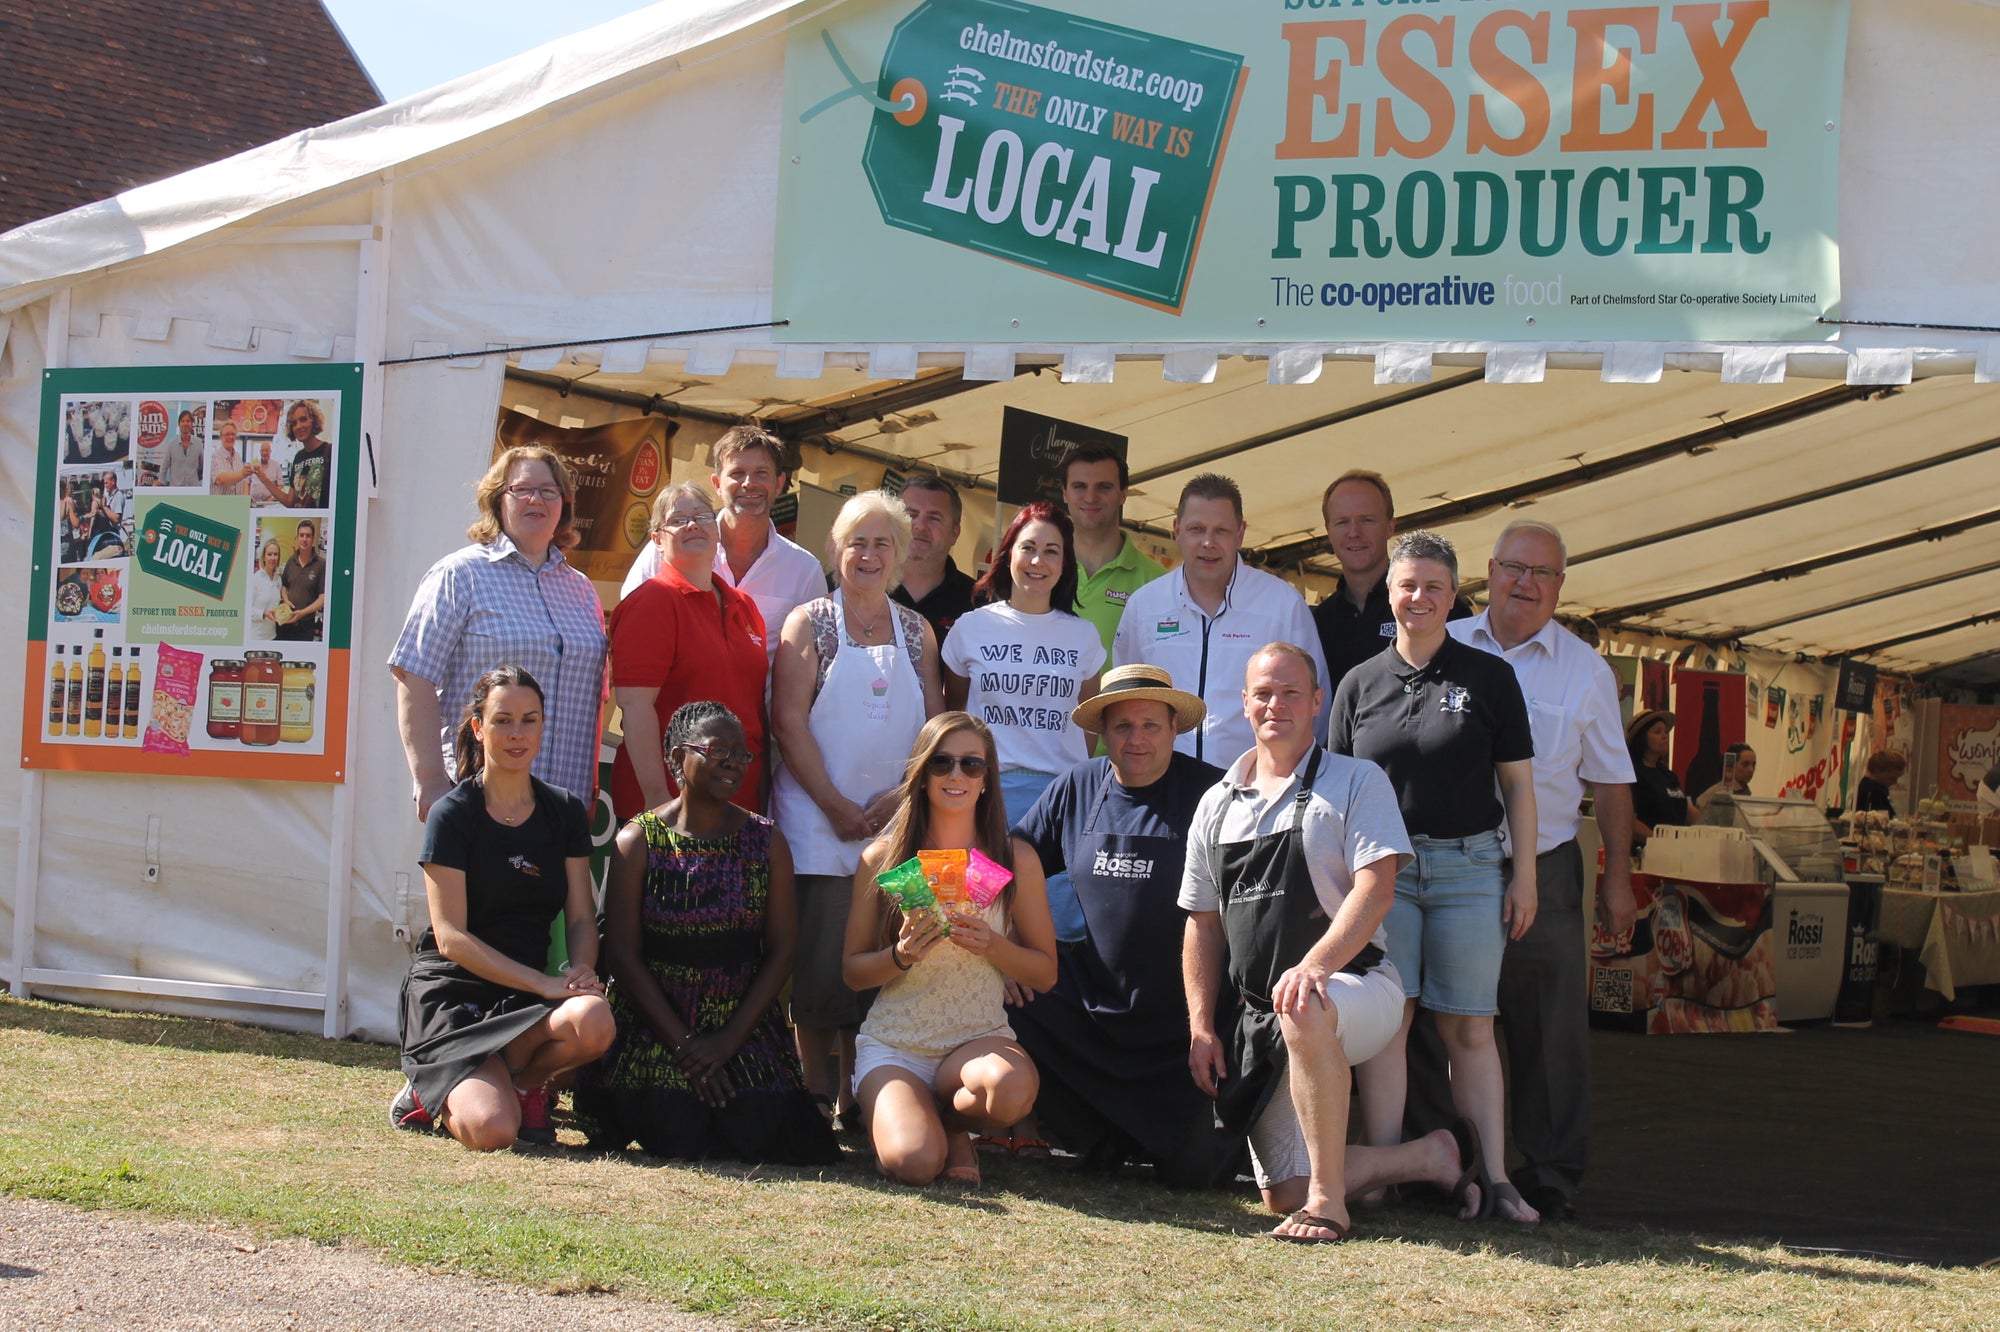 The Essex Festival of Food and Drink